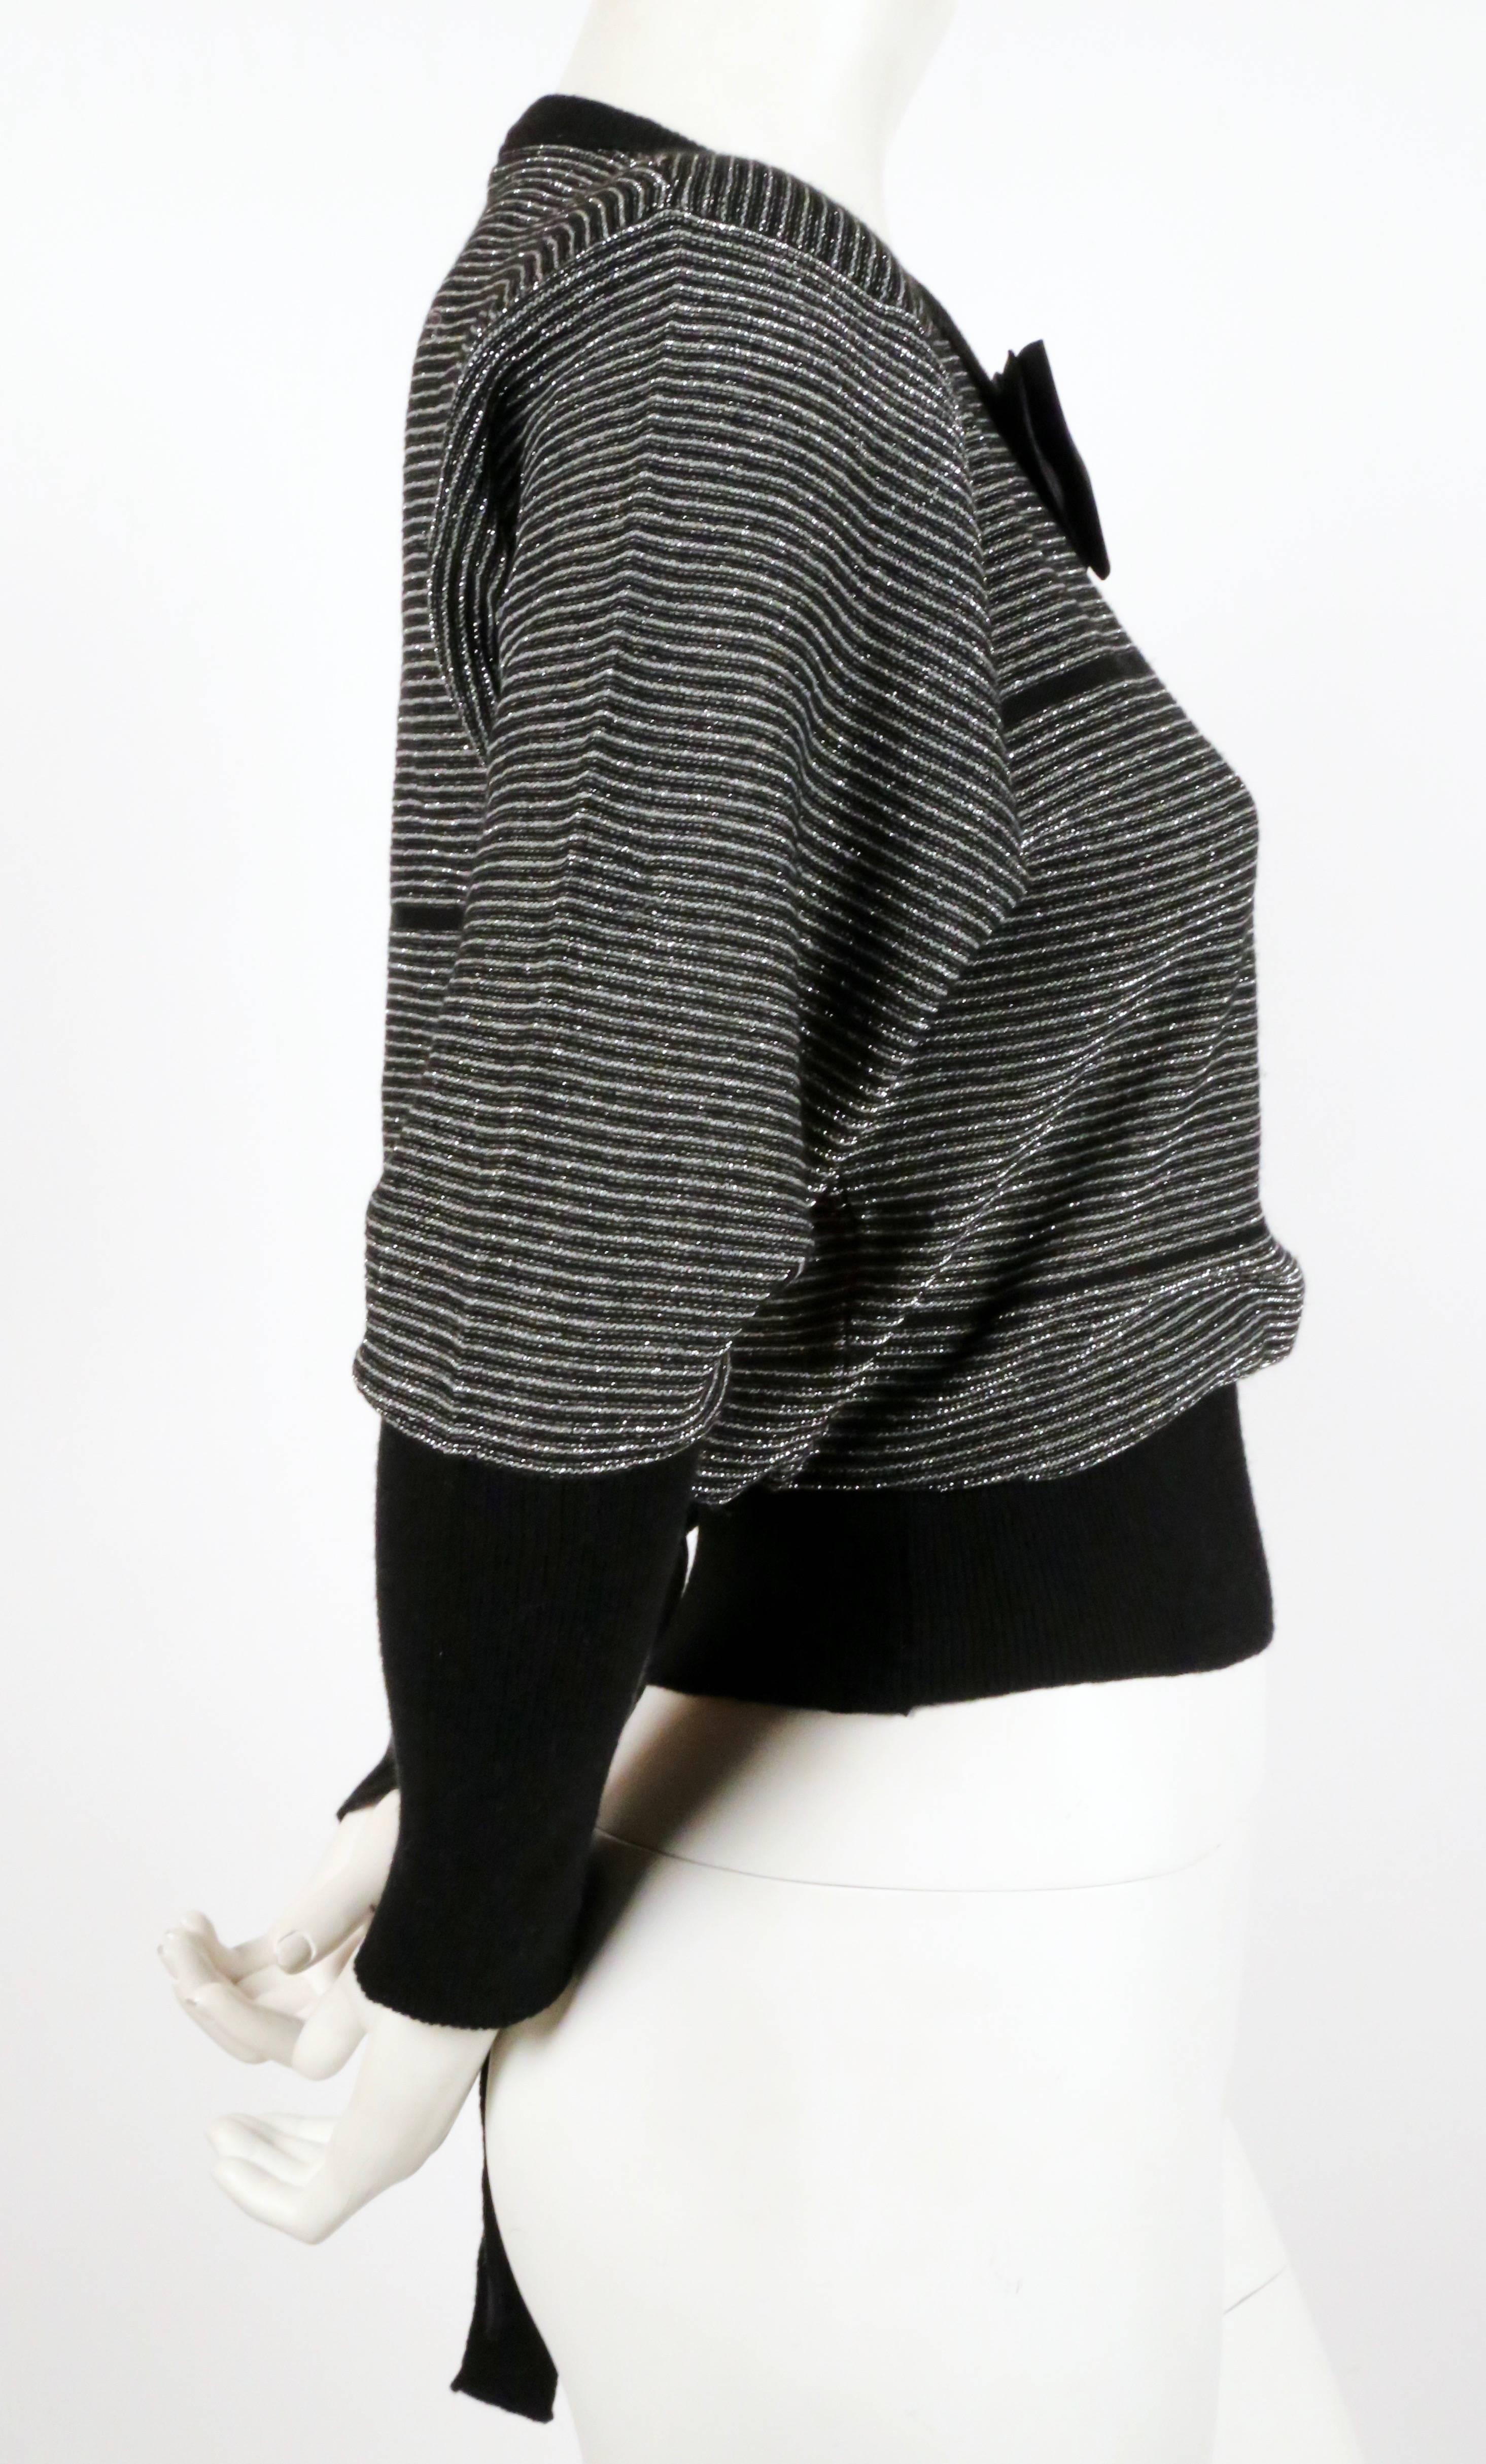 Black and silver lurex striped sweater with satin bowtie designed by Sonia Rykiel dating to the 1970's. Labeled a French size 36. Approximate unstretched measurements: shoulder 17